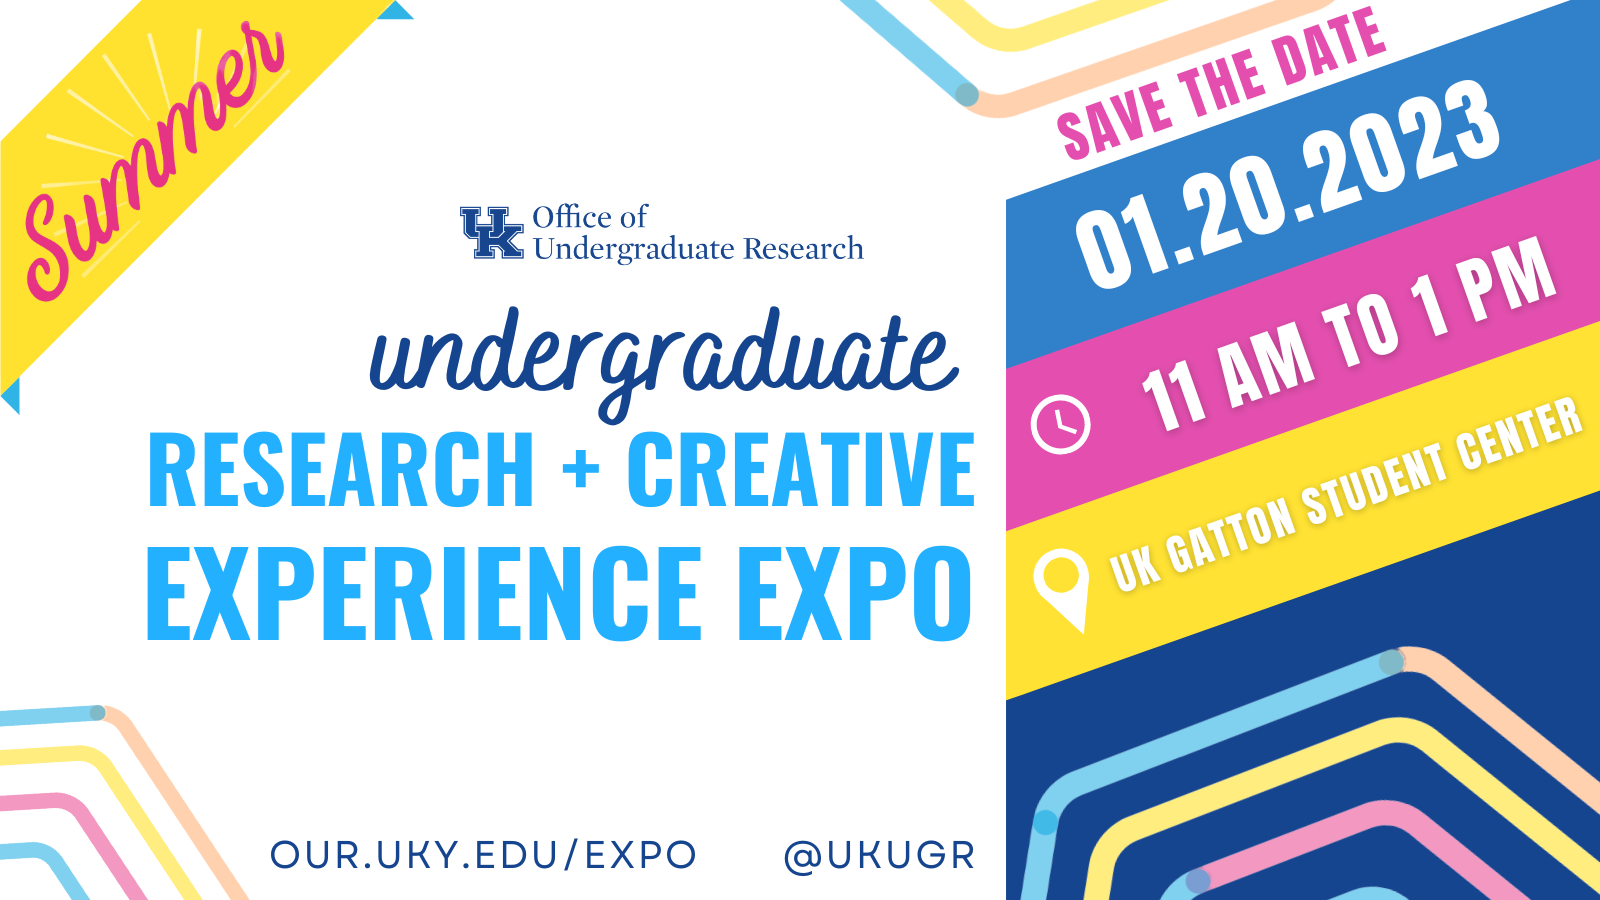 summer research creative experience expo University of Kentucky